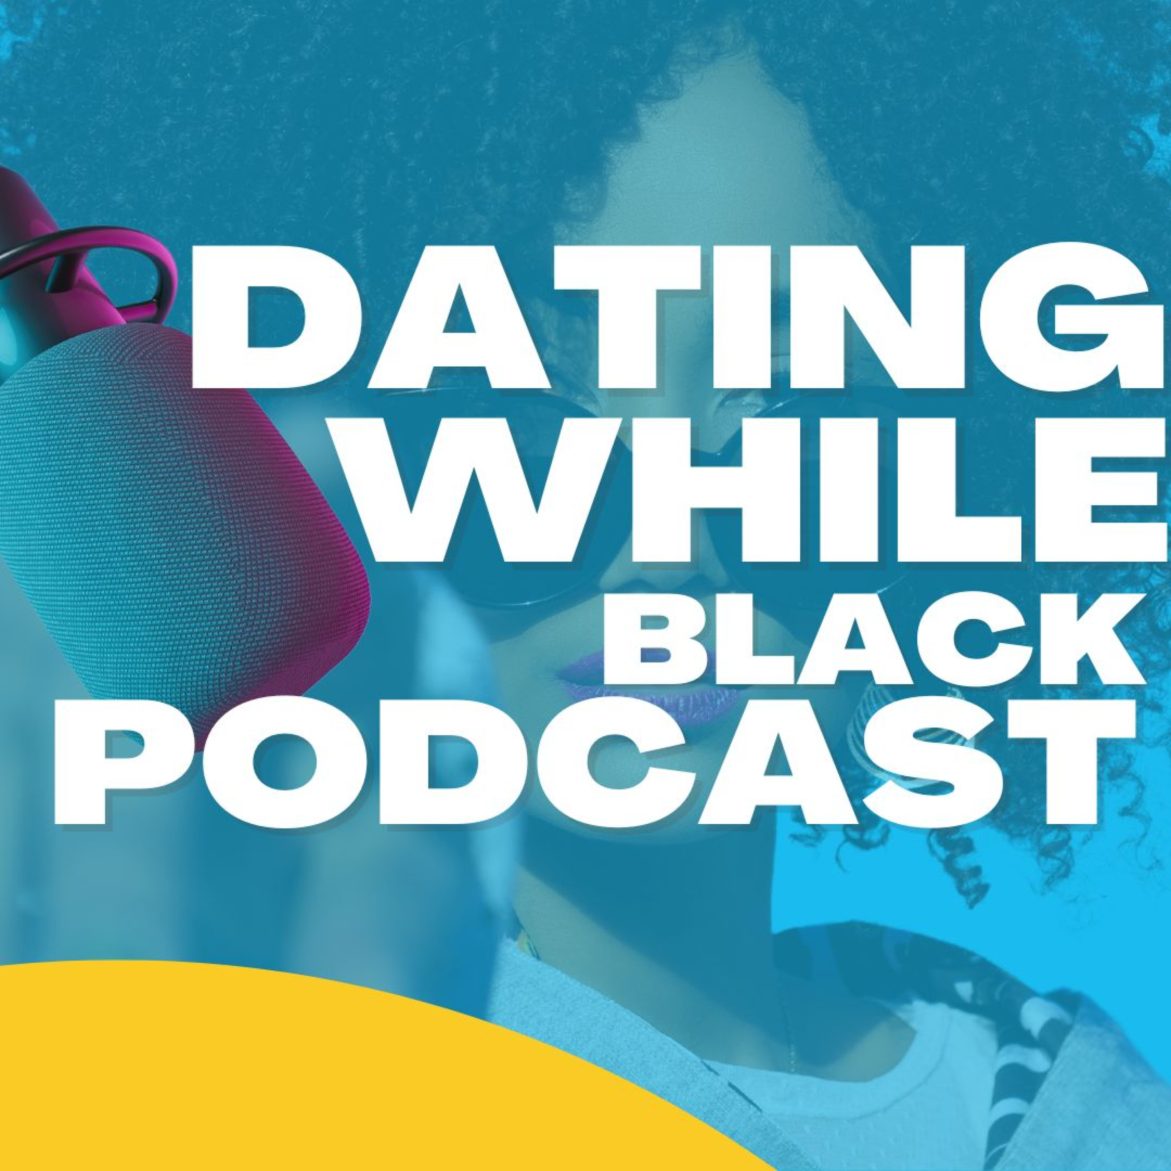 Black Podcasting - Dating Dilemma - Friendly Fraud